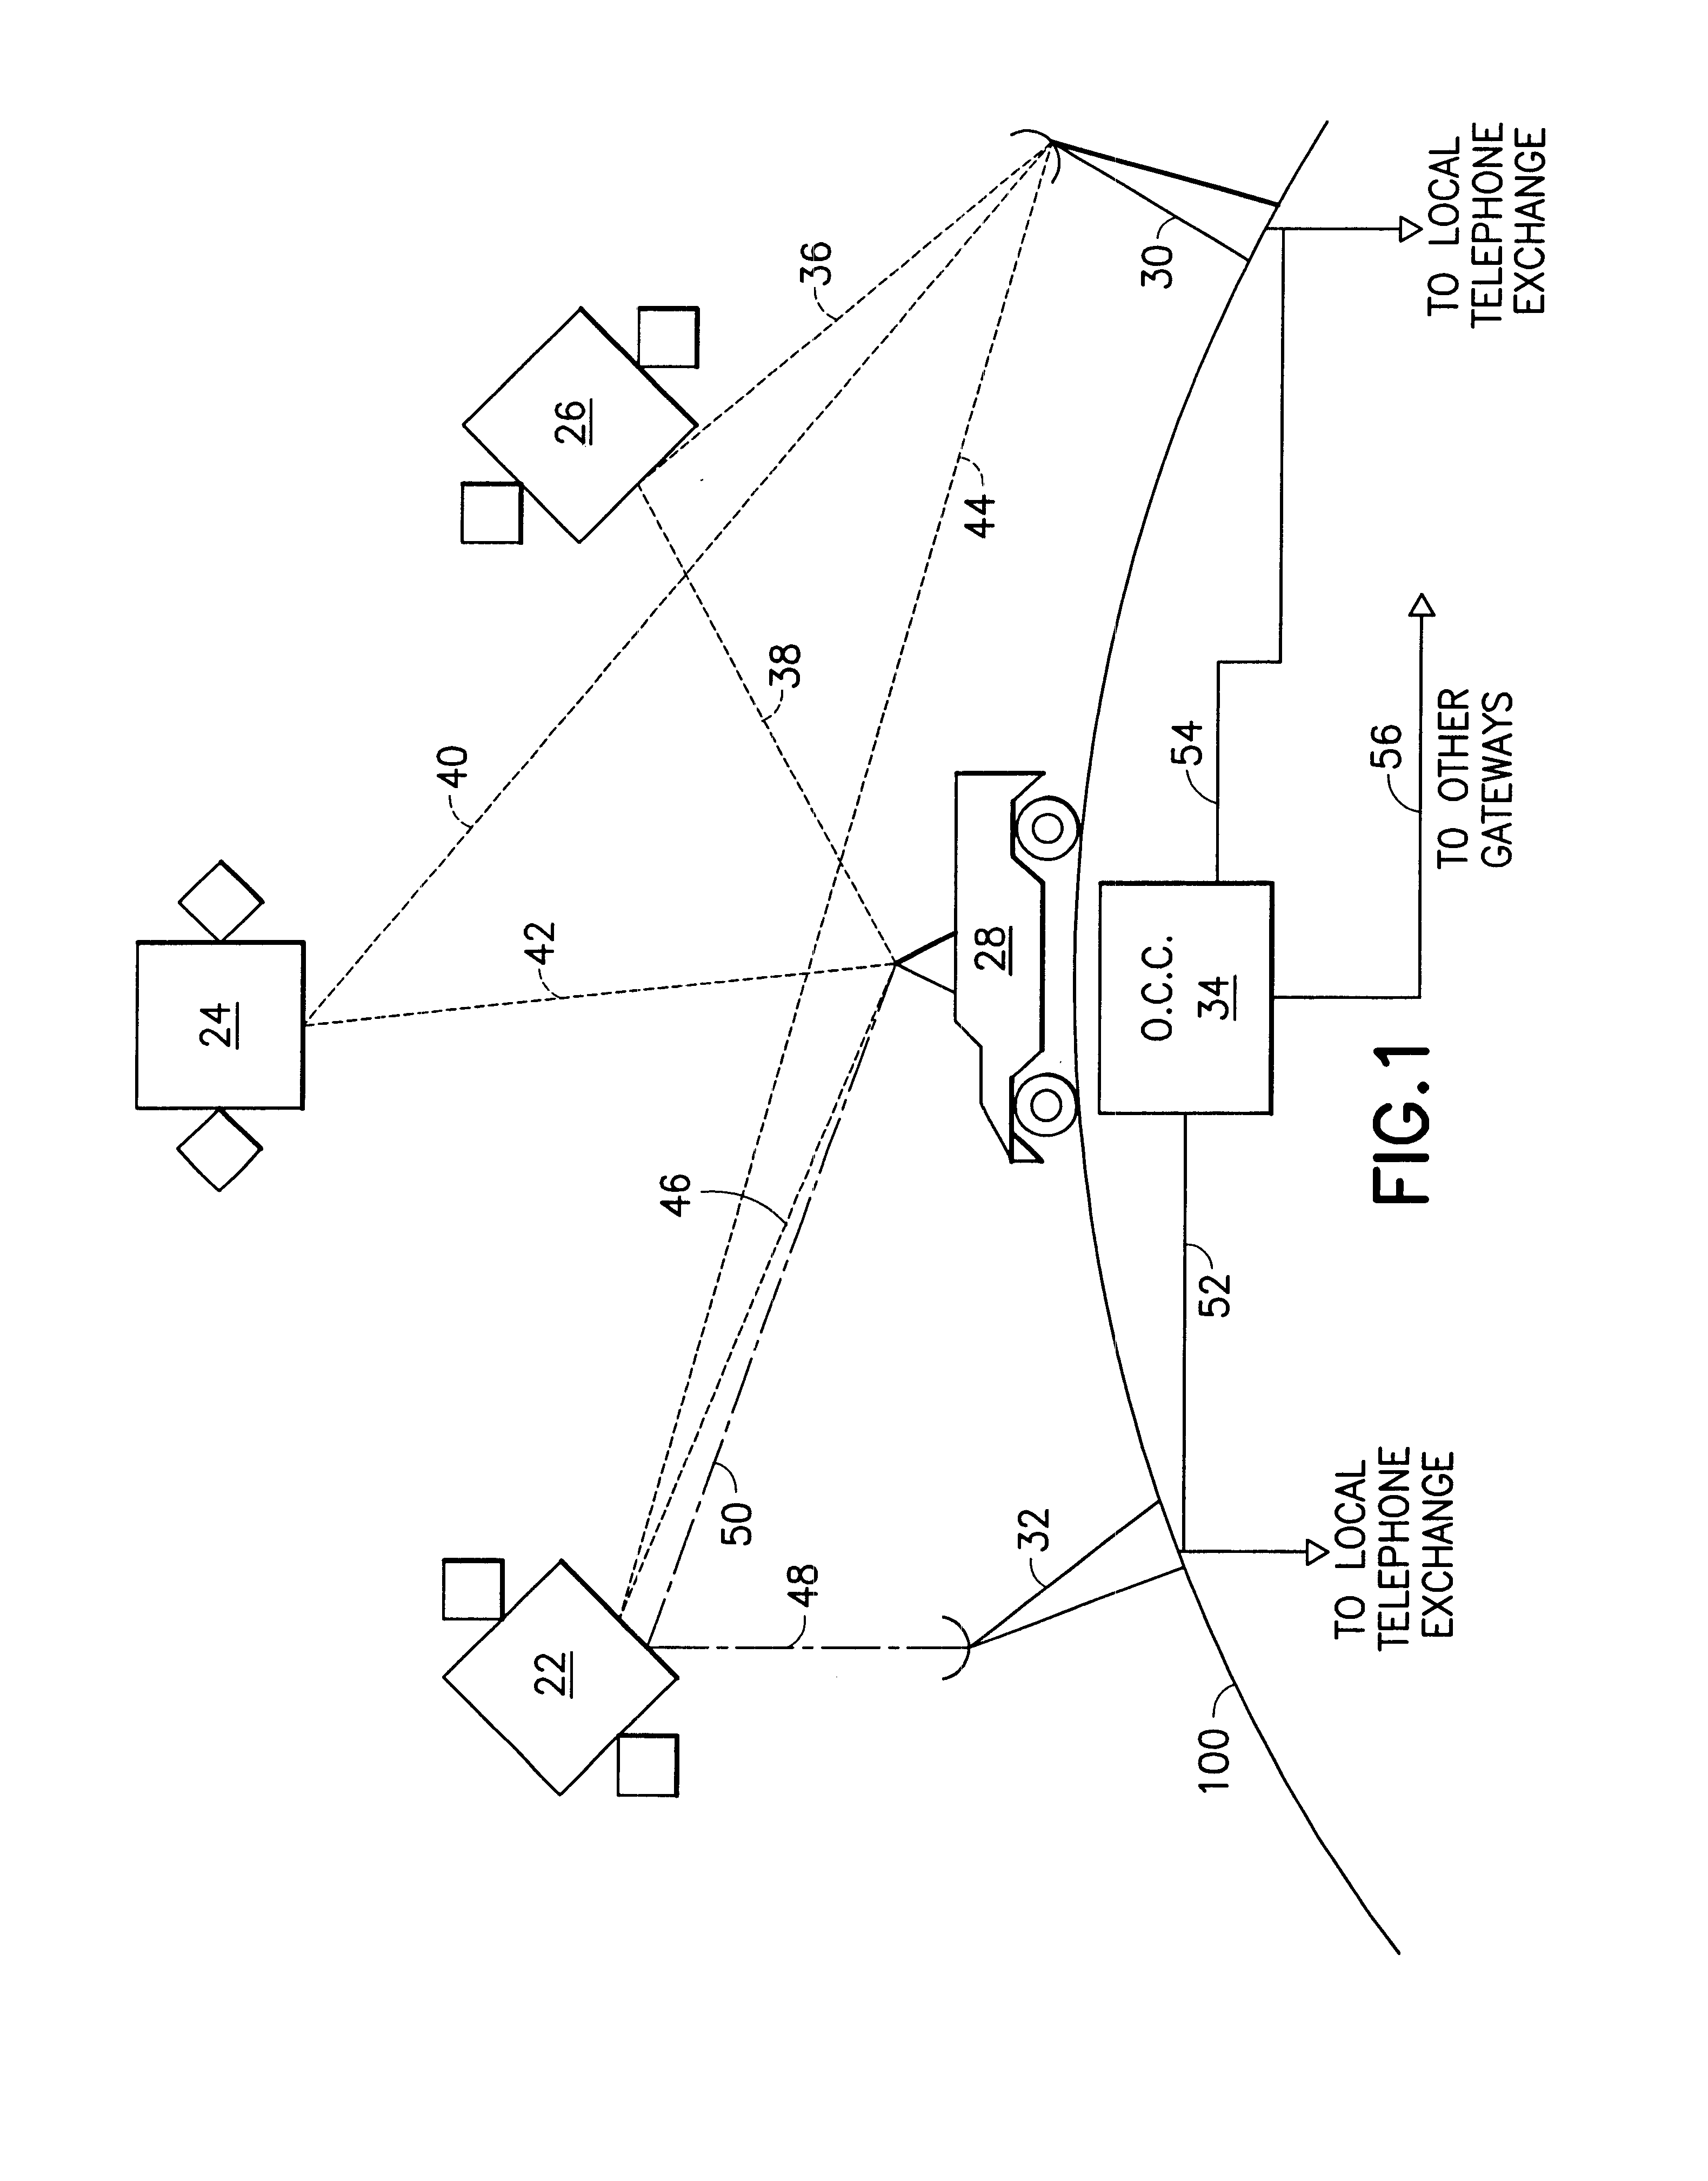 Channel frequency allocation for multiple-satellite communication network